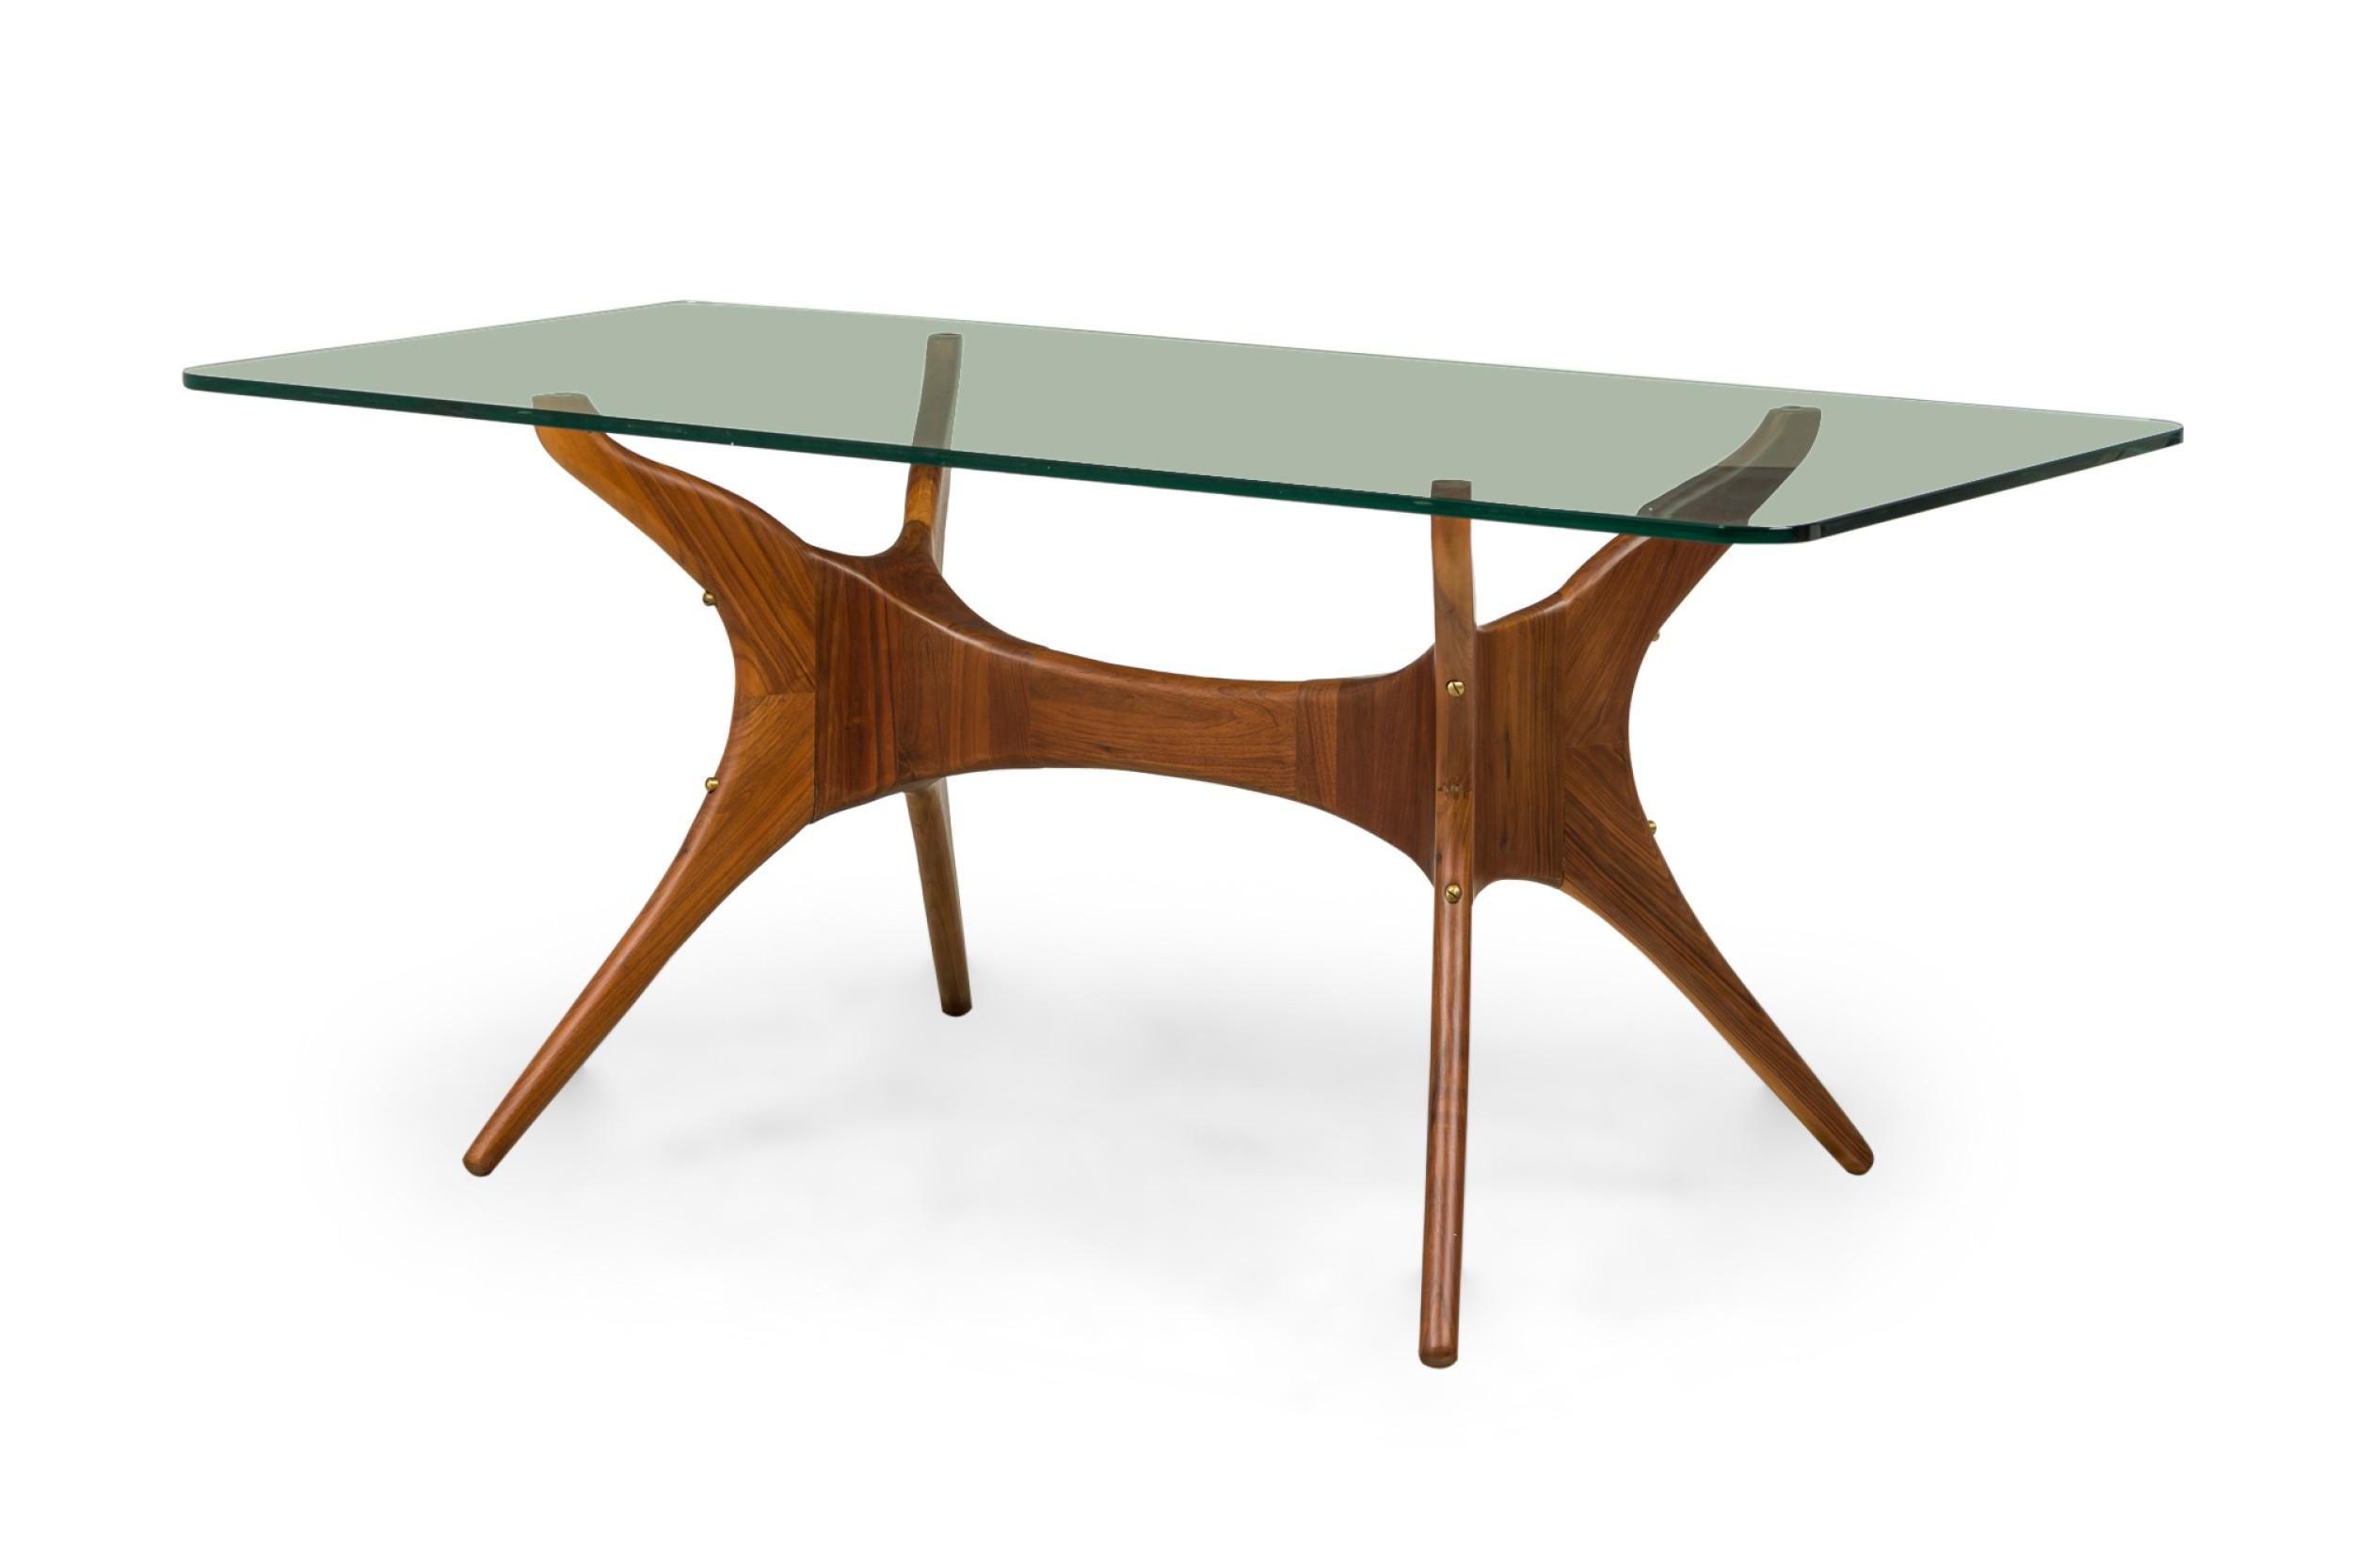 Contemporary rectangular Dining Table constructed of solid walnut with tempered glass top and brass screw details.